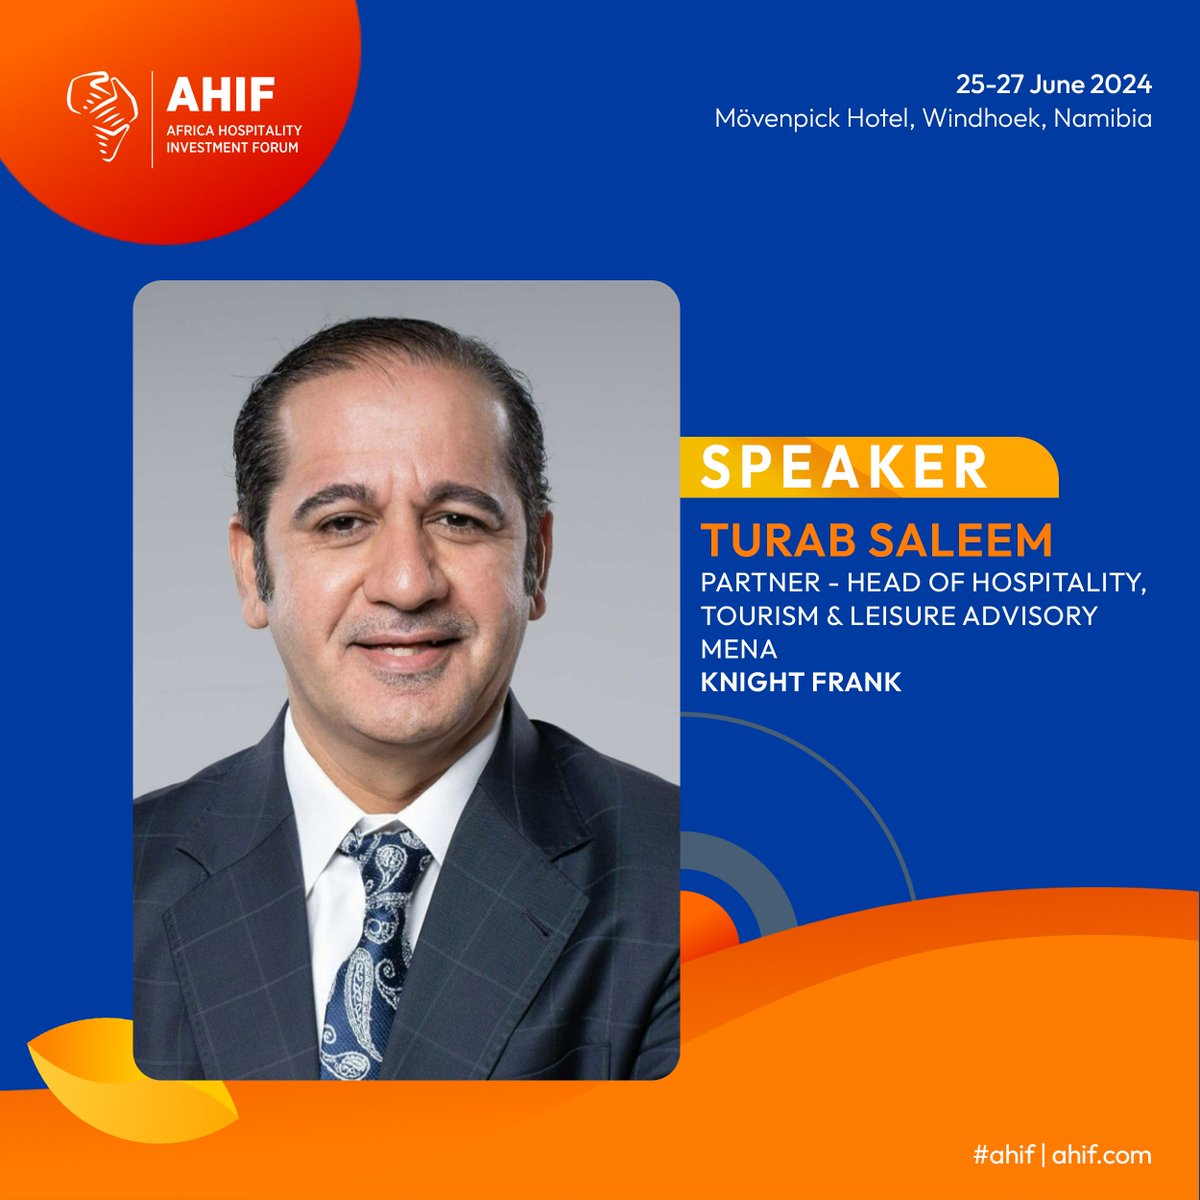 Turab Saleem - seasoned hospitality leader with a proven track record spanning 22 years joins the AHIF Speaker lineup. Secure your spot today and gain invaluable insights from industry leaders at AHIF! hubs.la/Q02rh2420